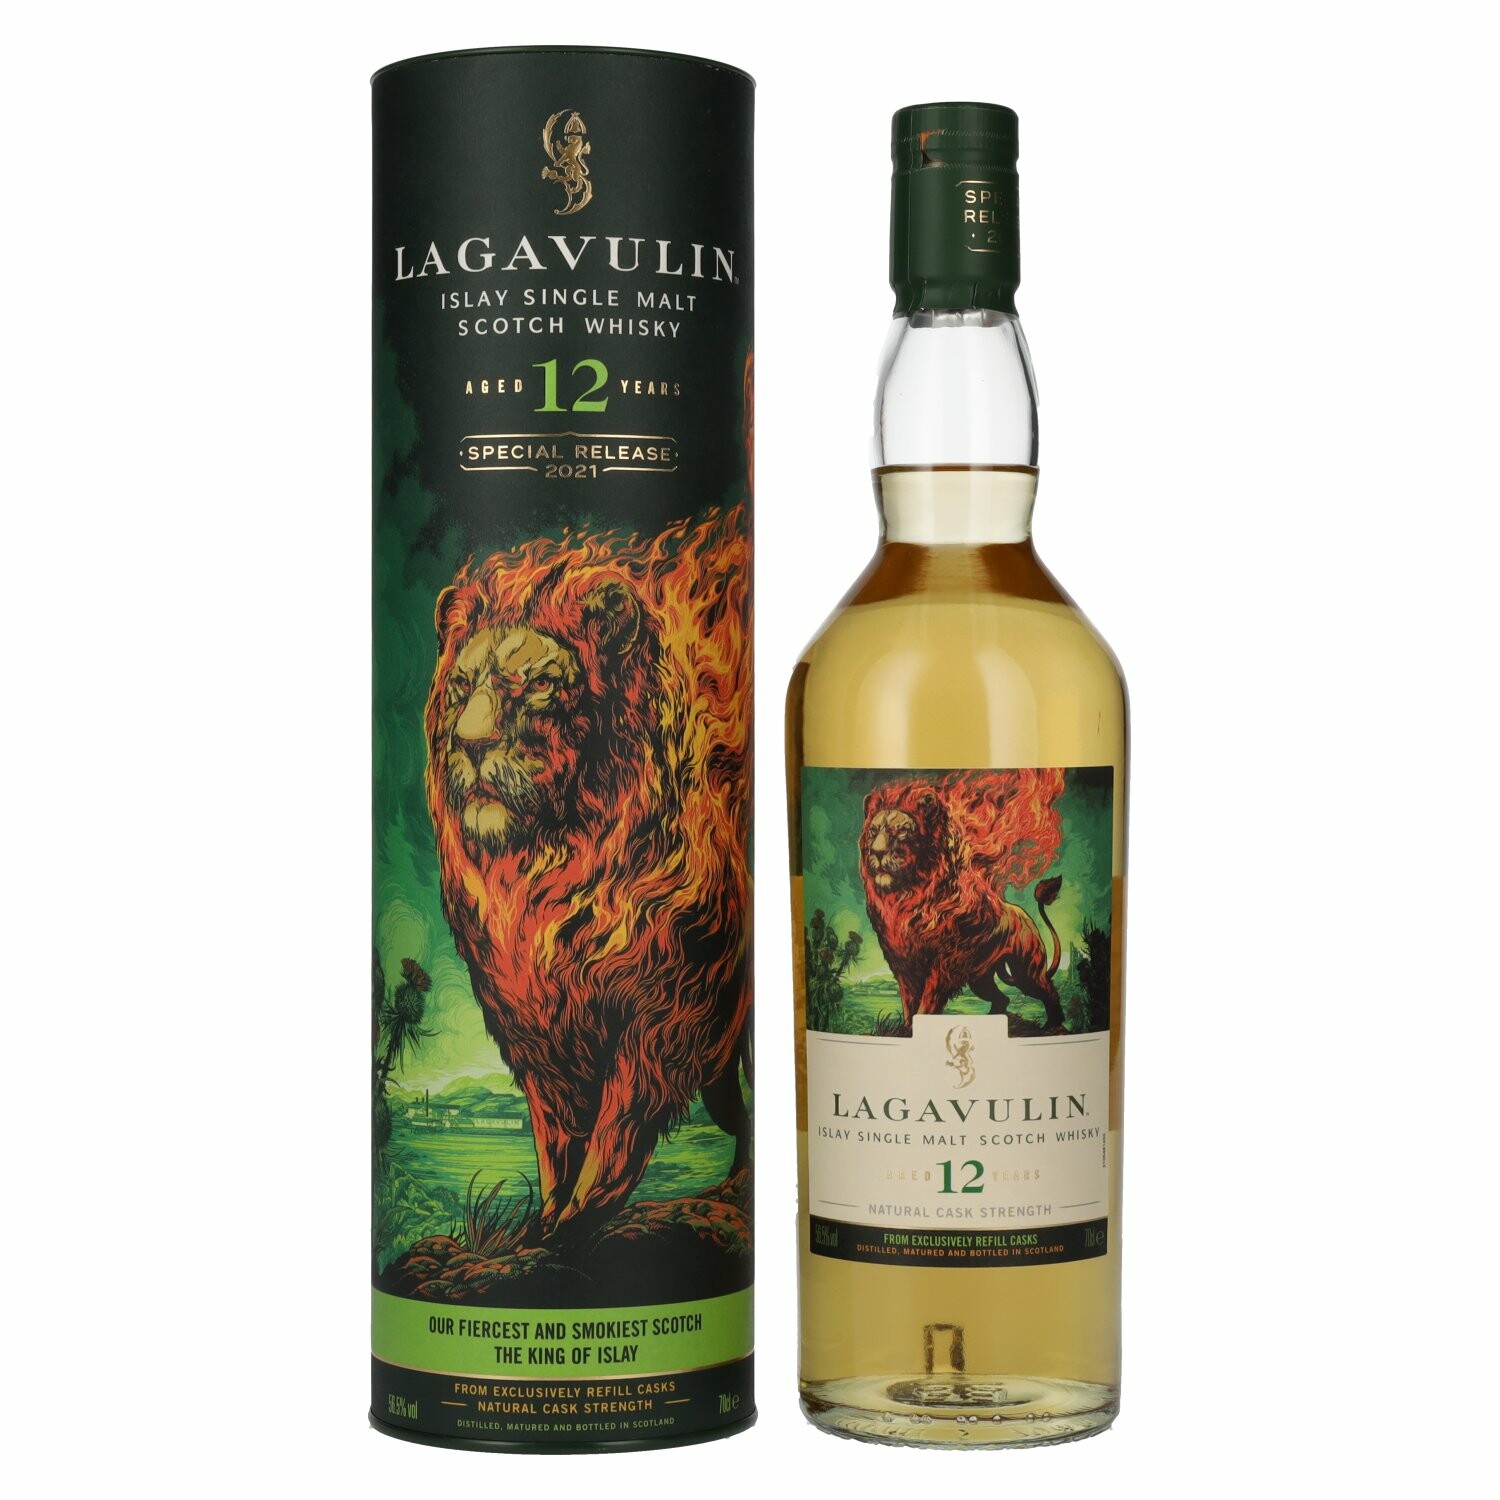 Lagavulin 12 Years Old THE LION'S FIRE Special Release 2021 56,5% Vol. 0,7l in Giftbox